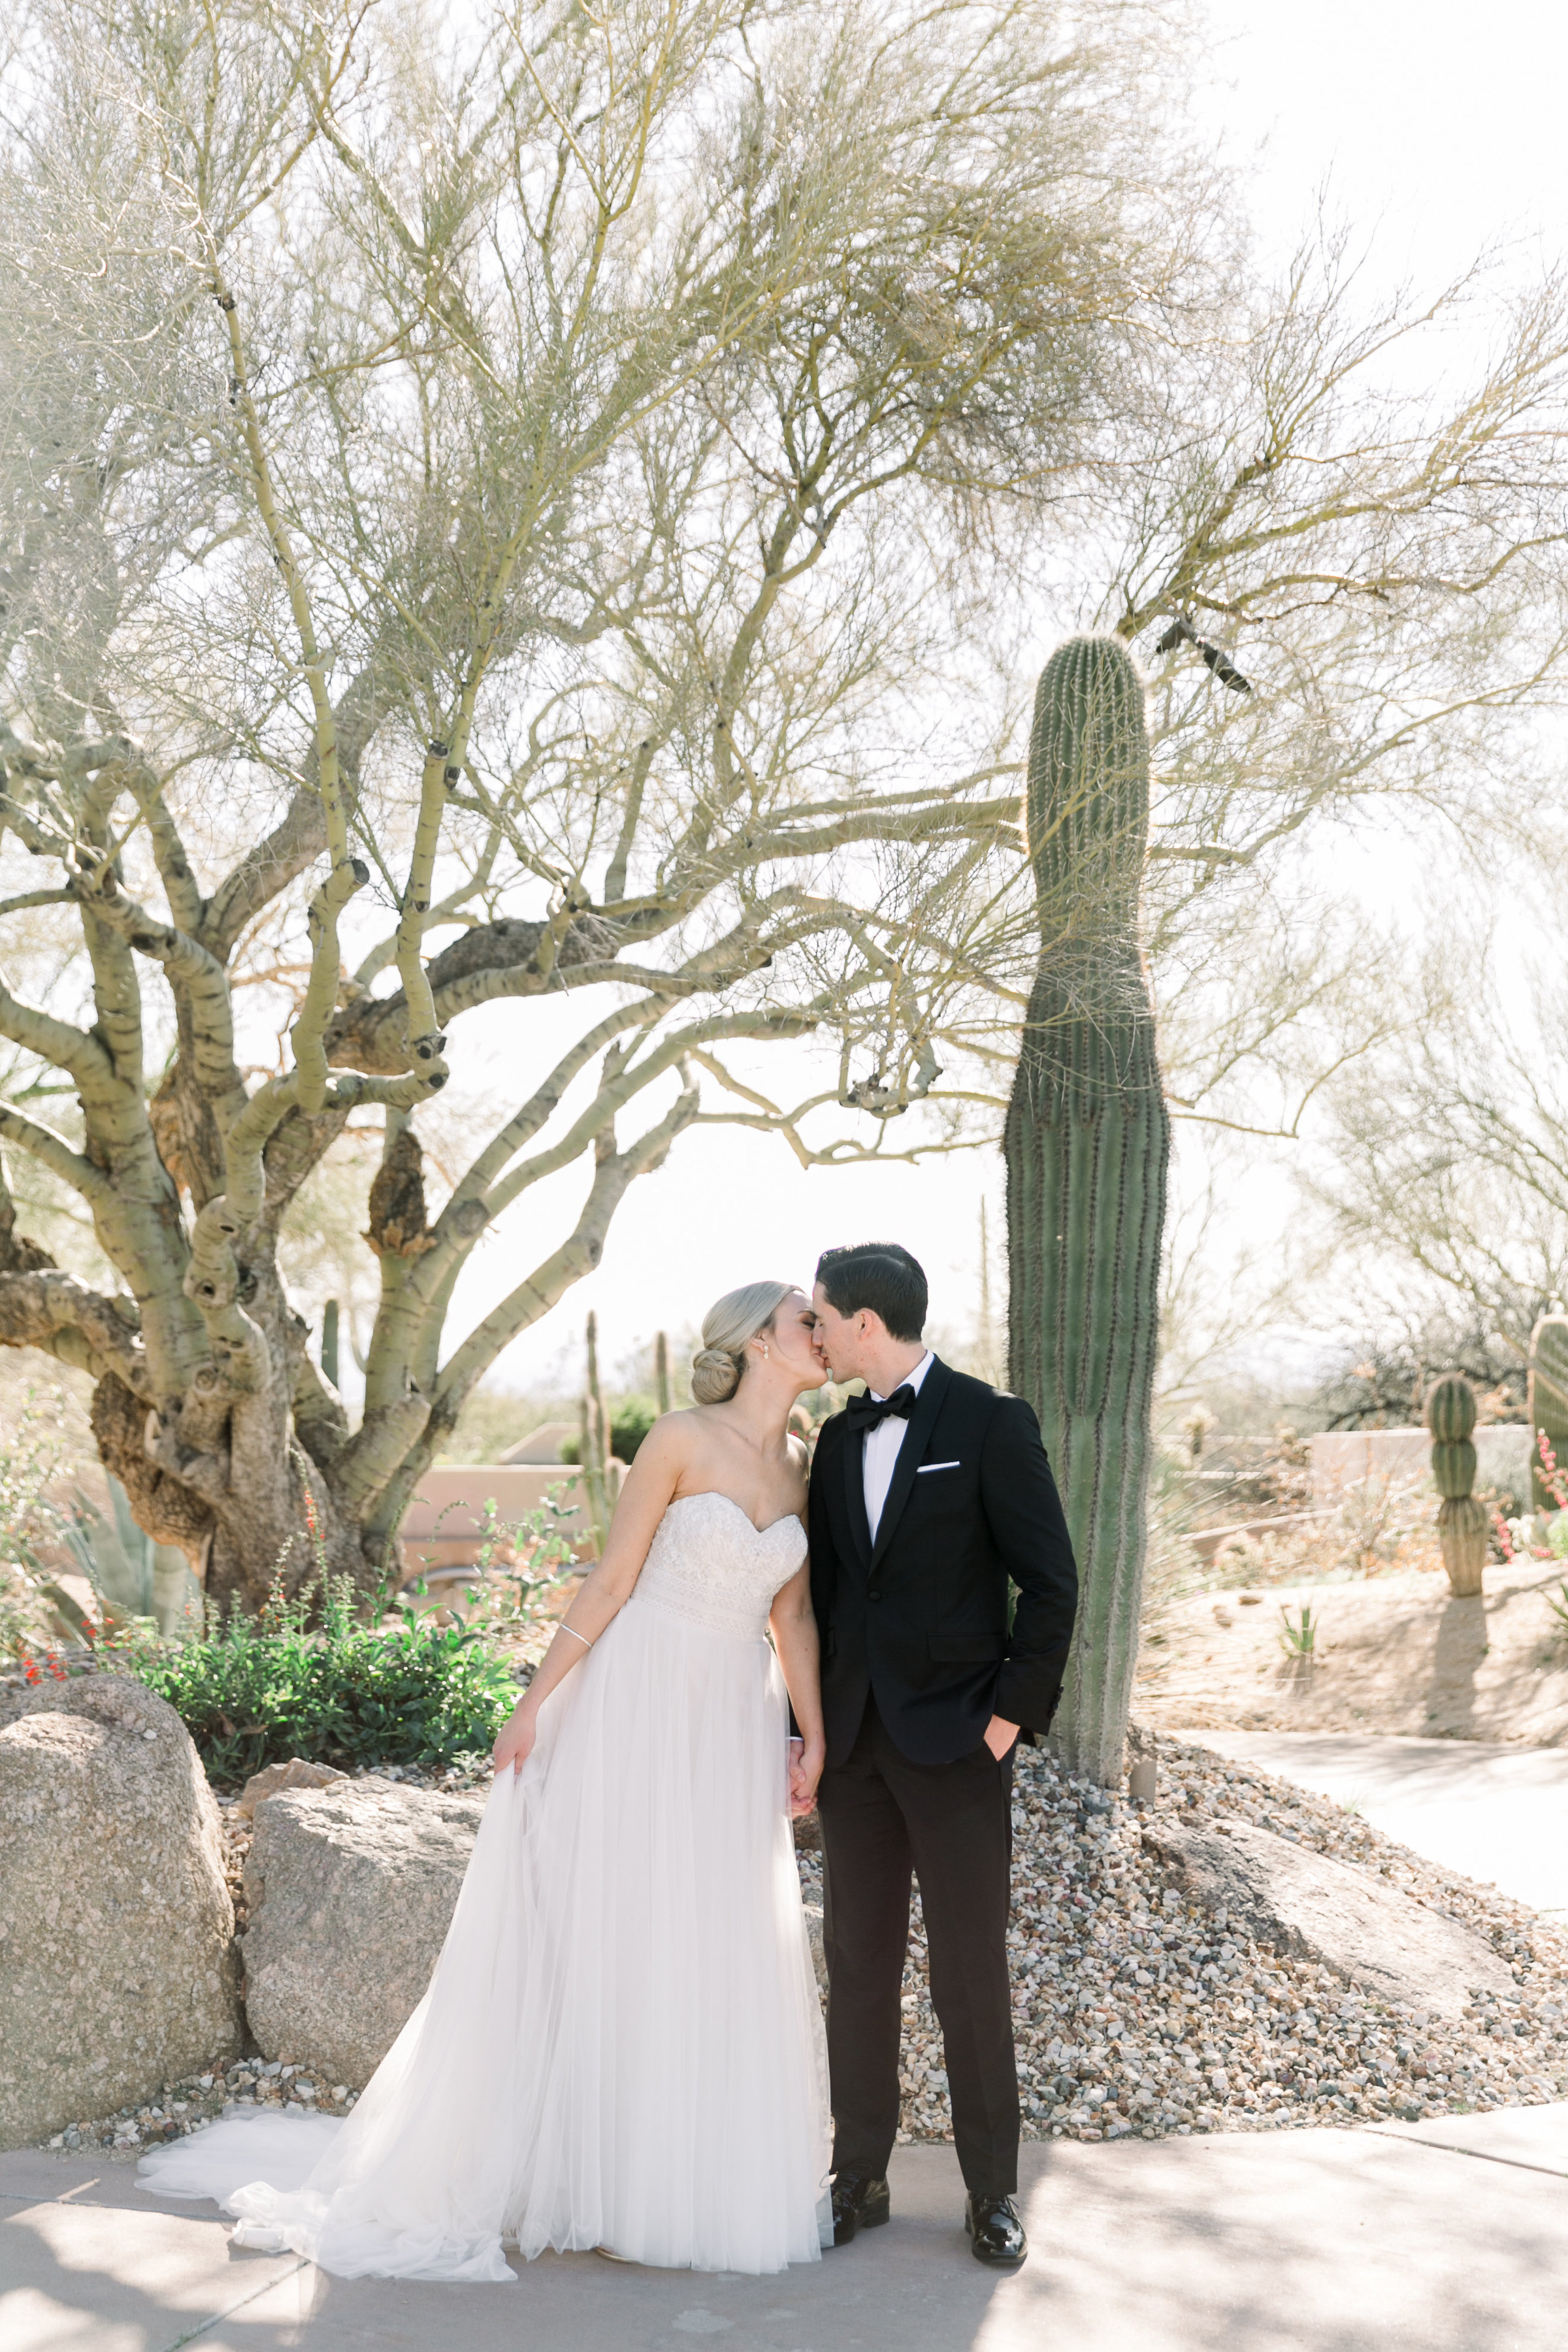 Karlie Colleen Photography - Arizona Wedding at The Troon Scottsdale Country Club - Paige & Shane -164